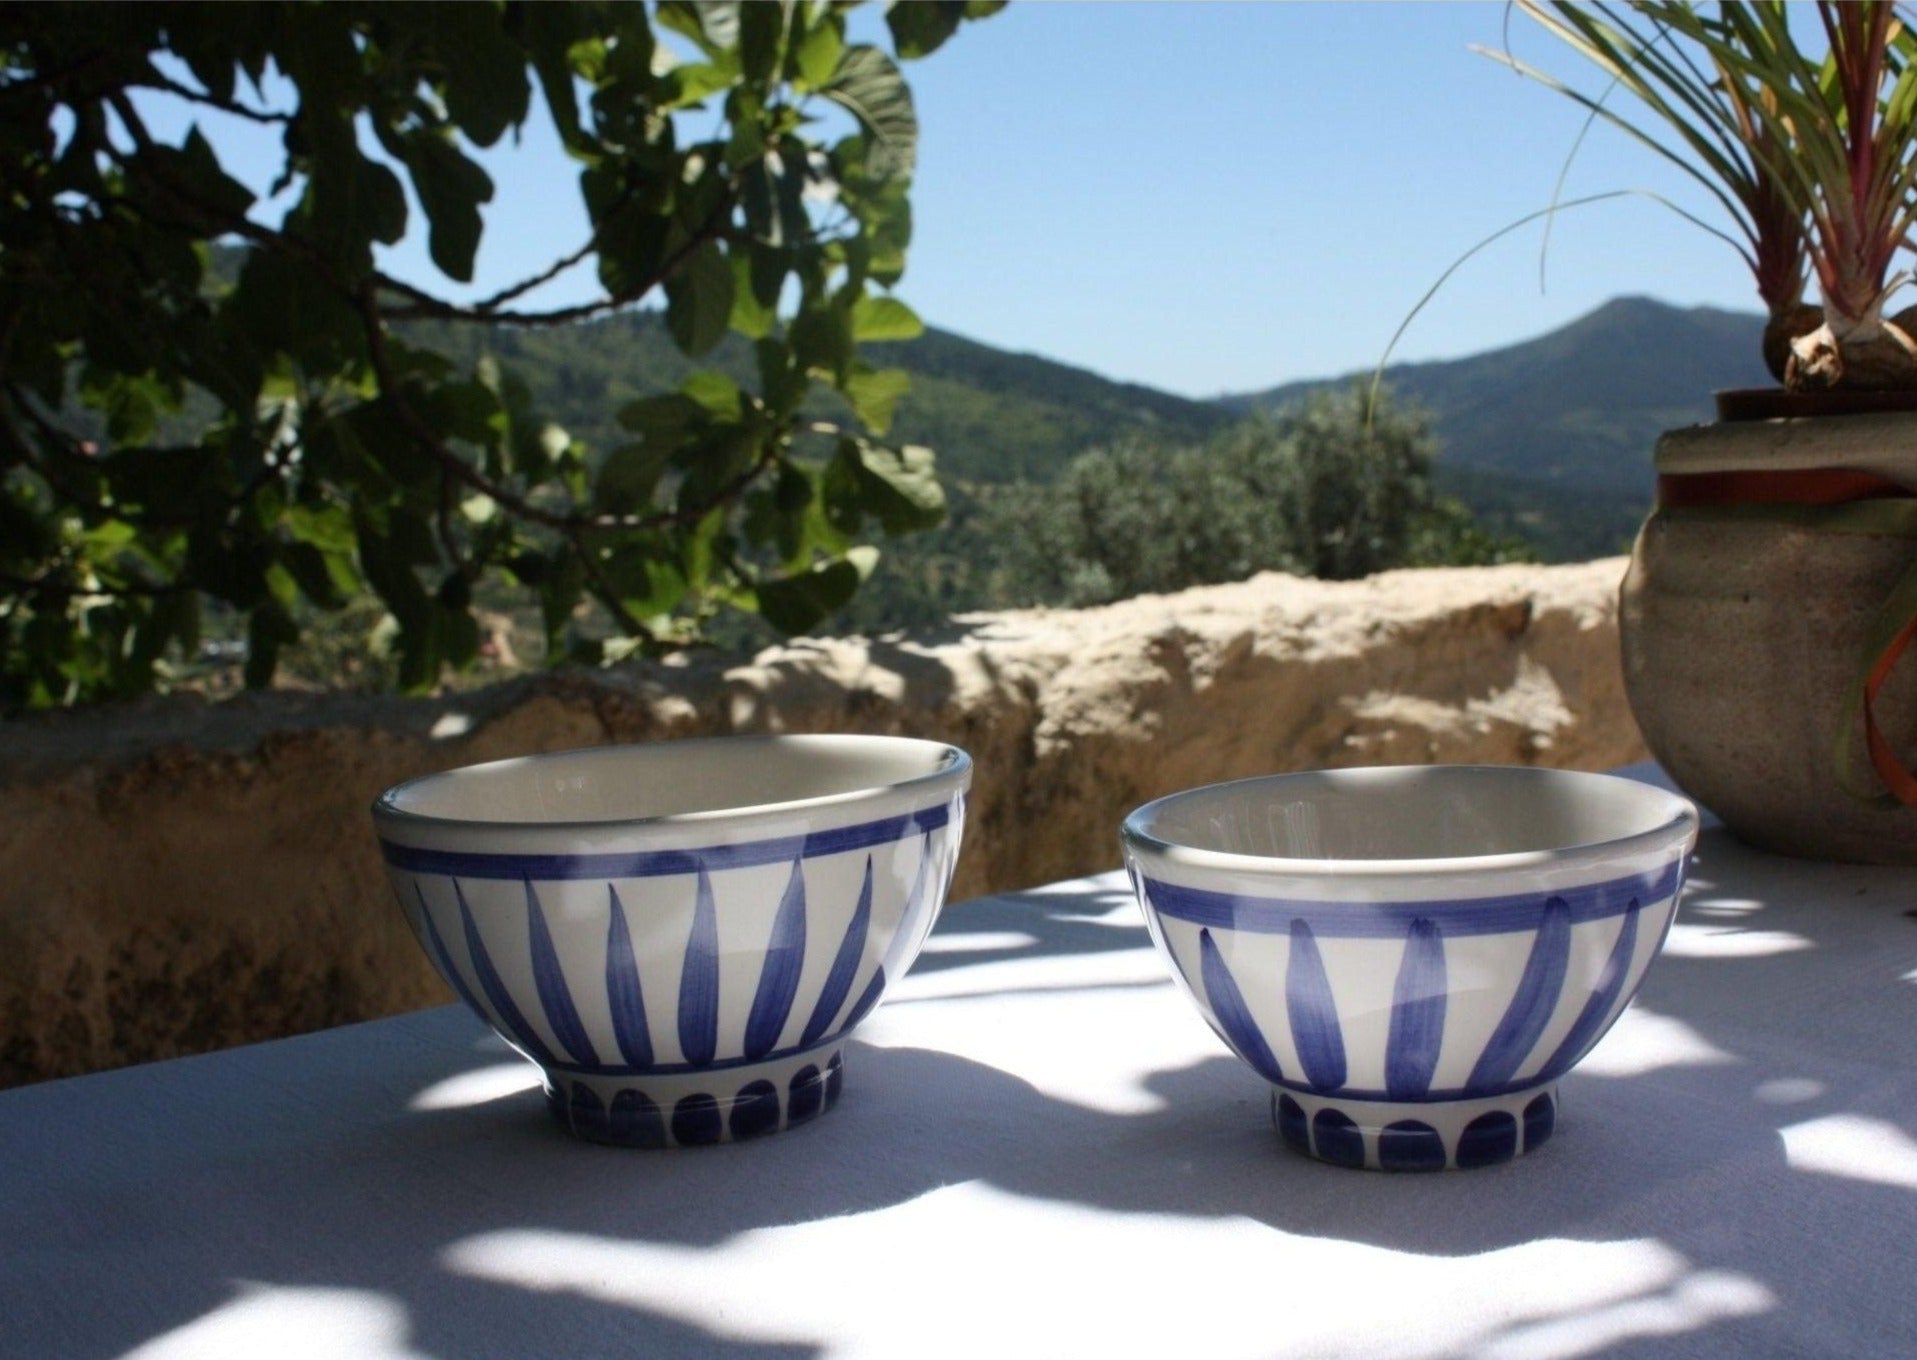 Tasse blanche à rayures bleues – Passions Portugal